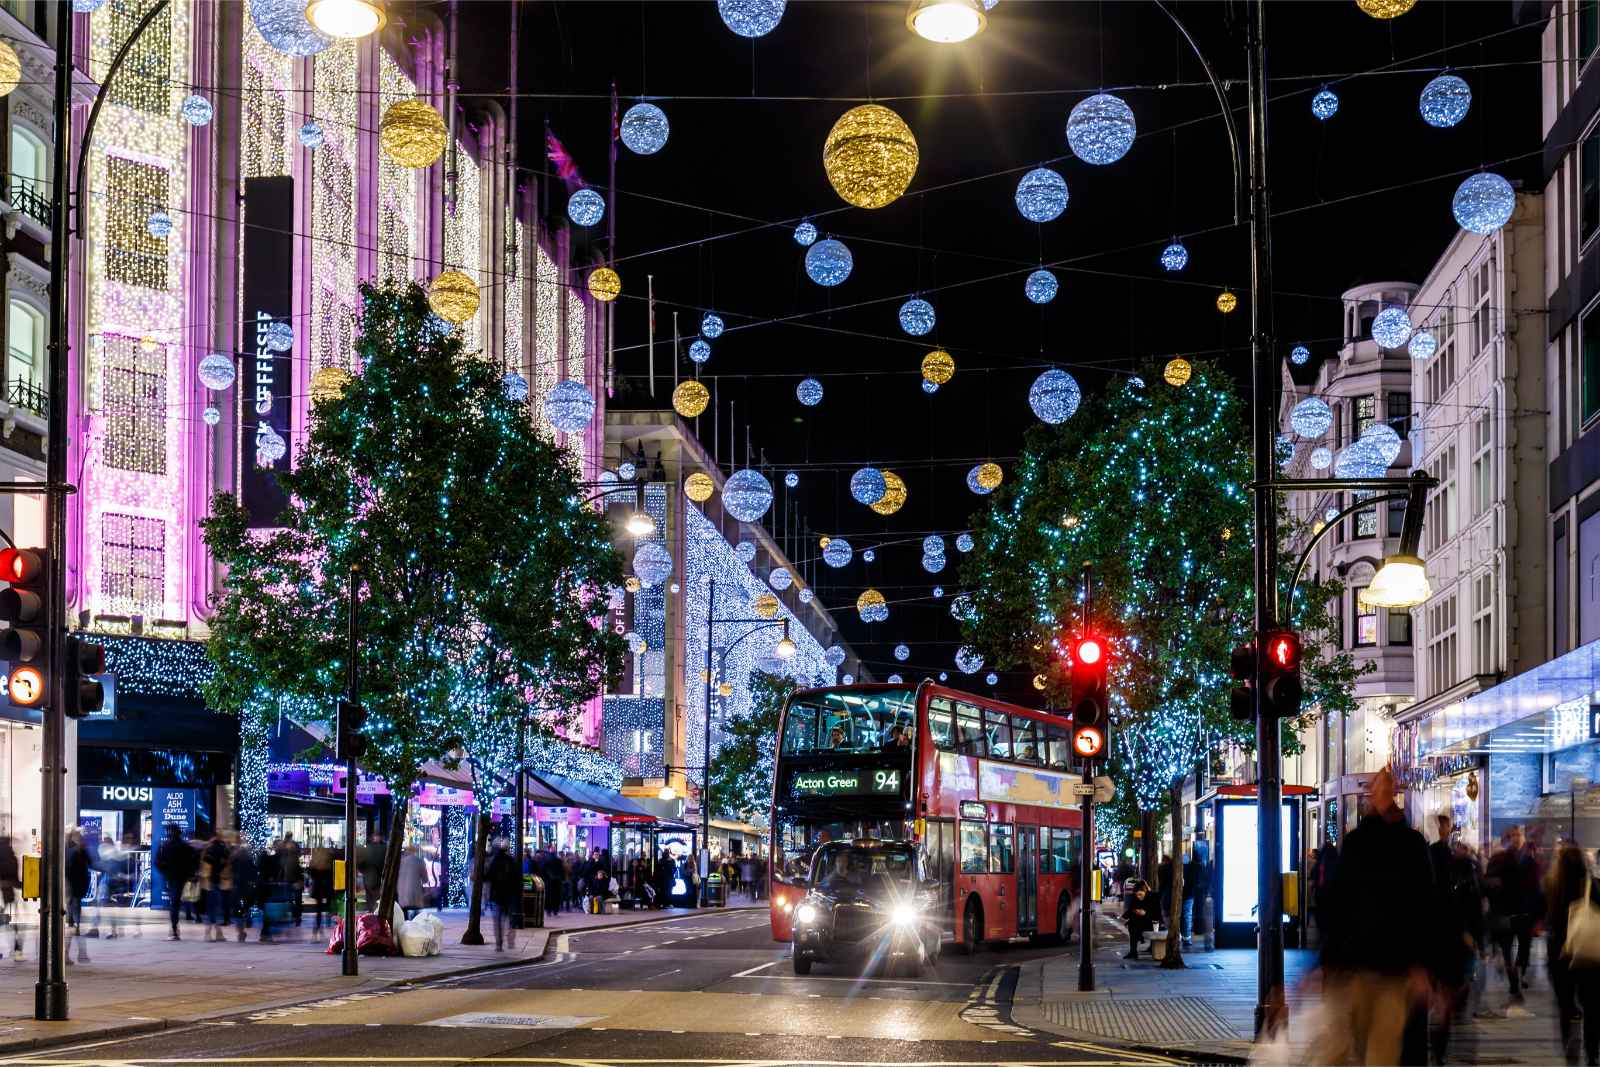 Shopping on Oxford Street at Christmas in London